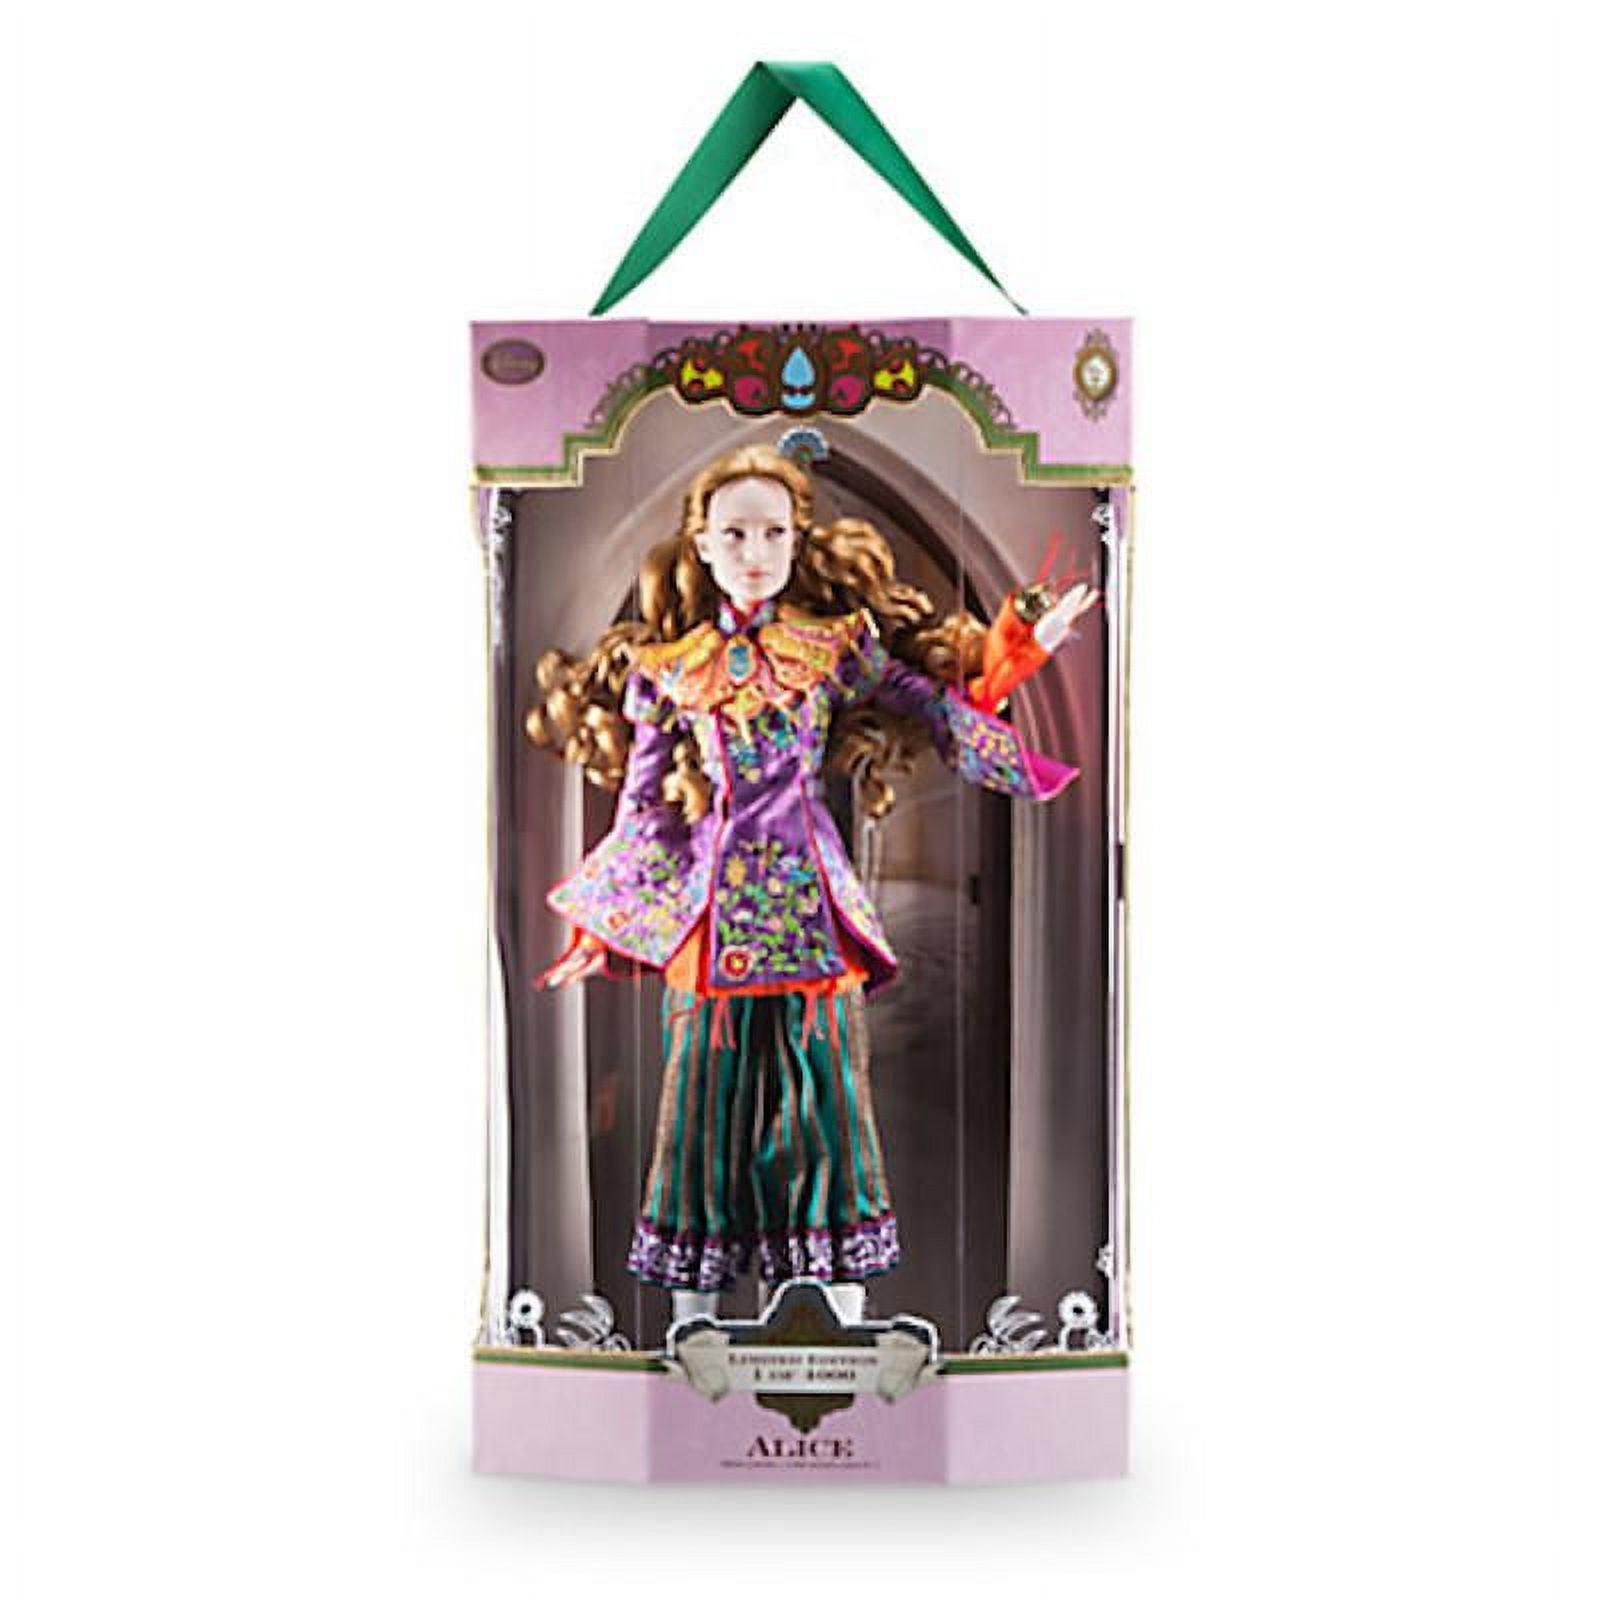  Disney Store Alice Through the Looking Glass Limited